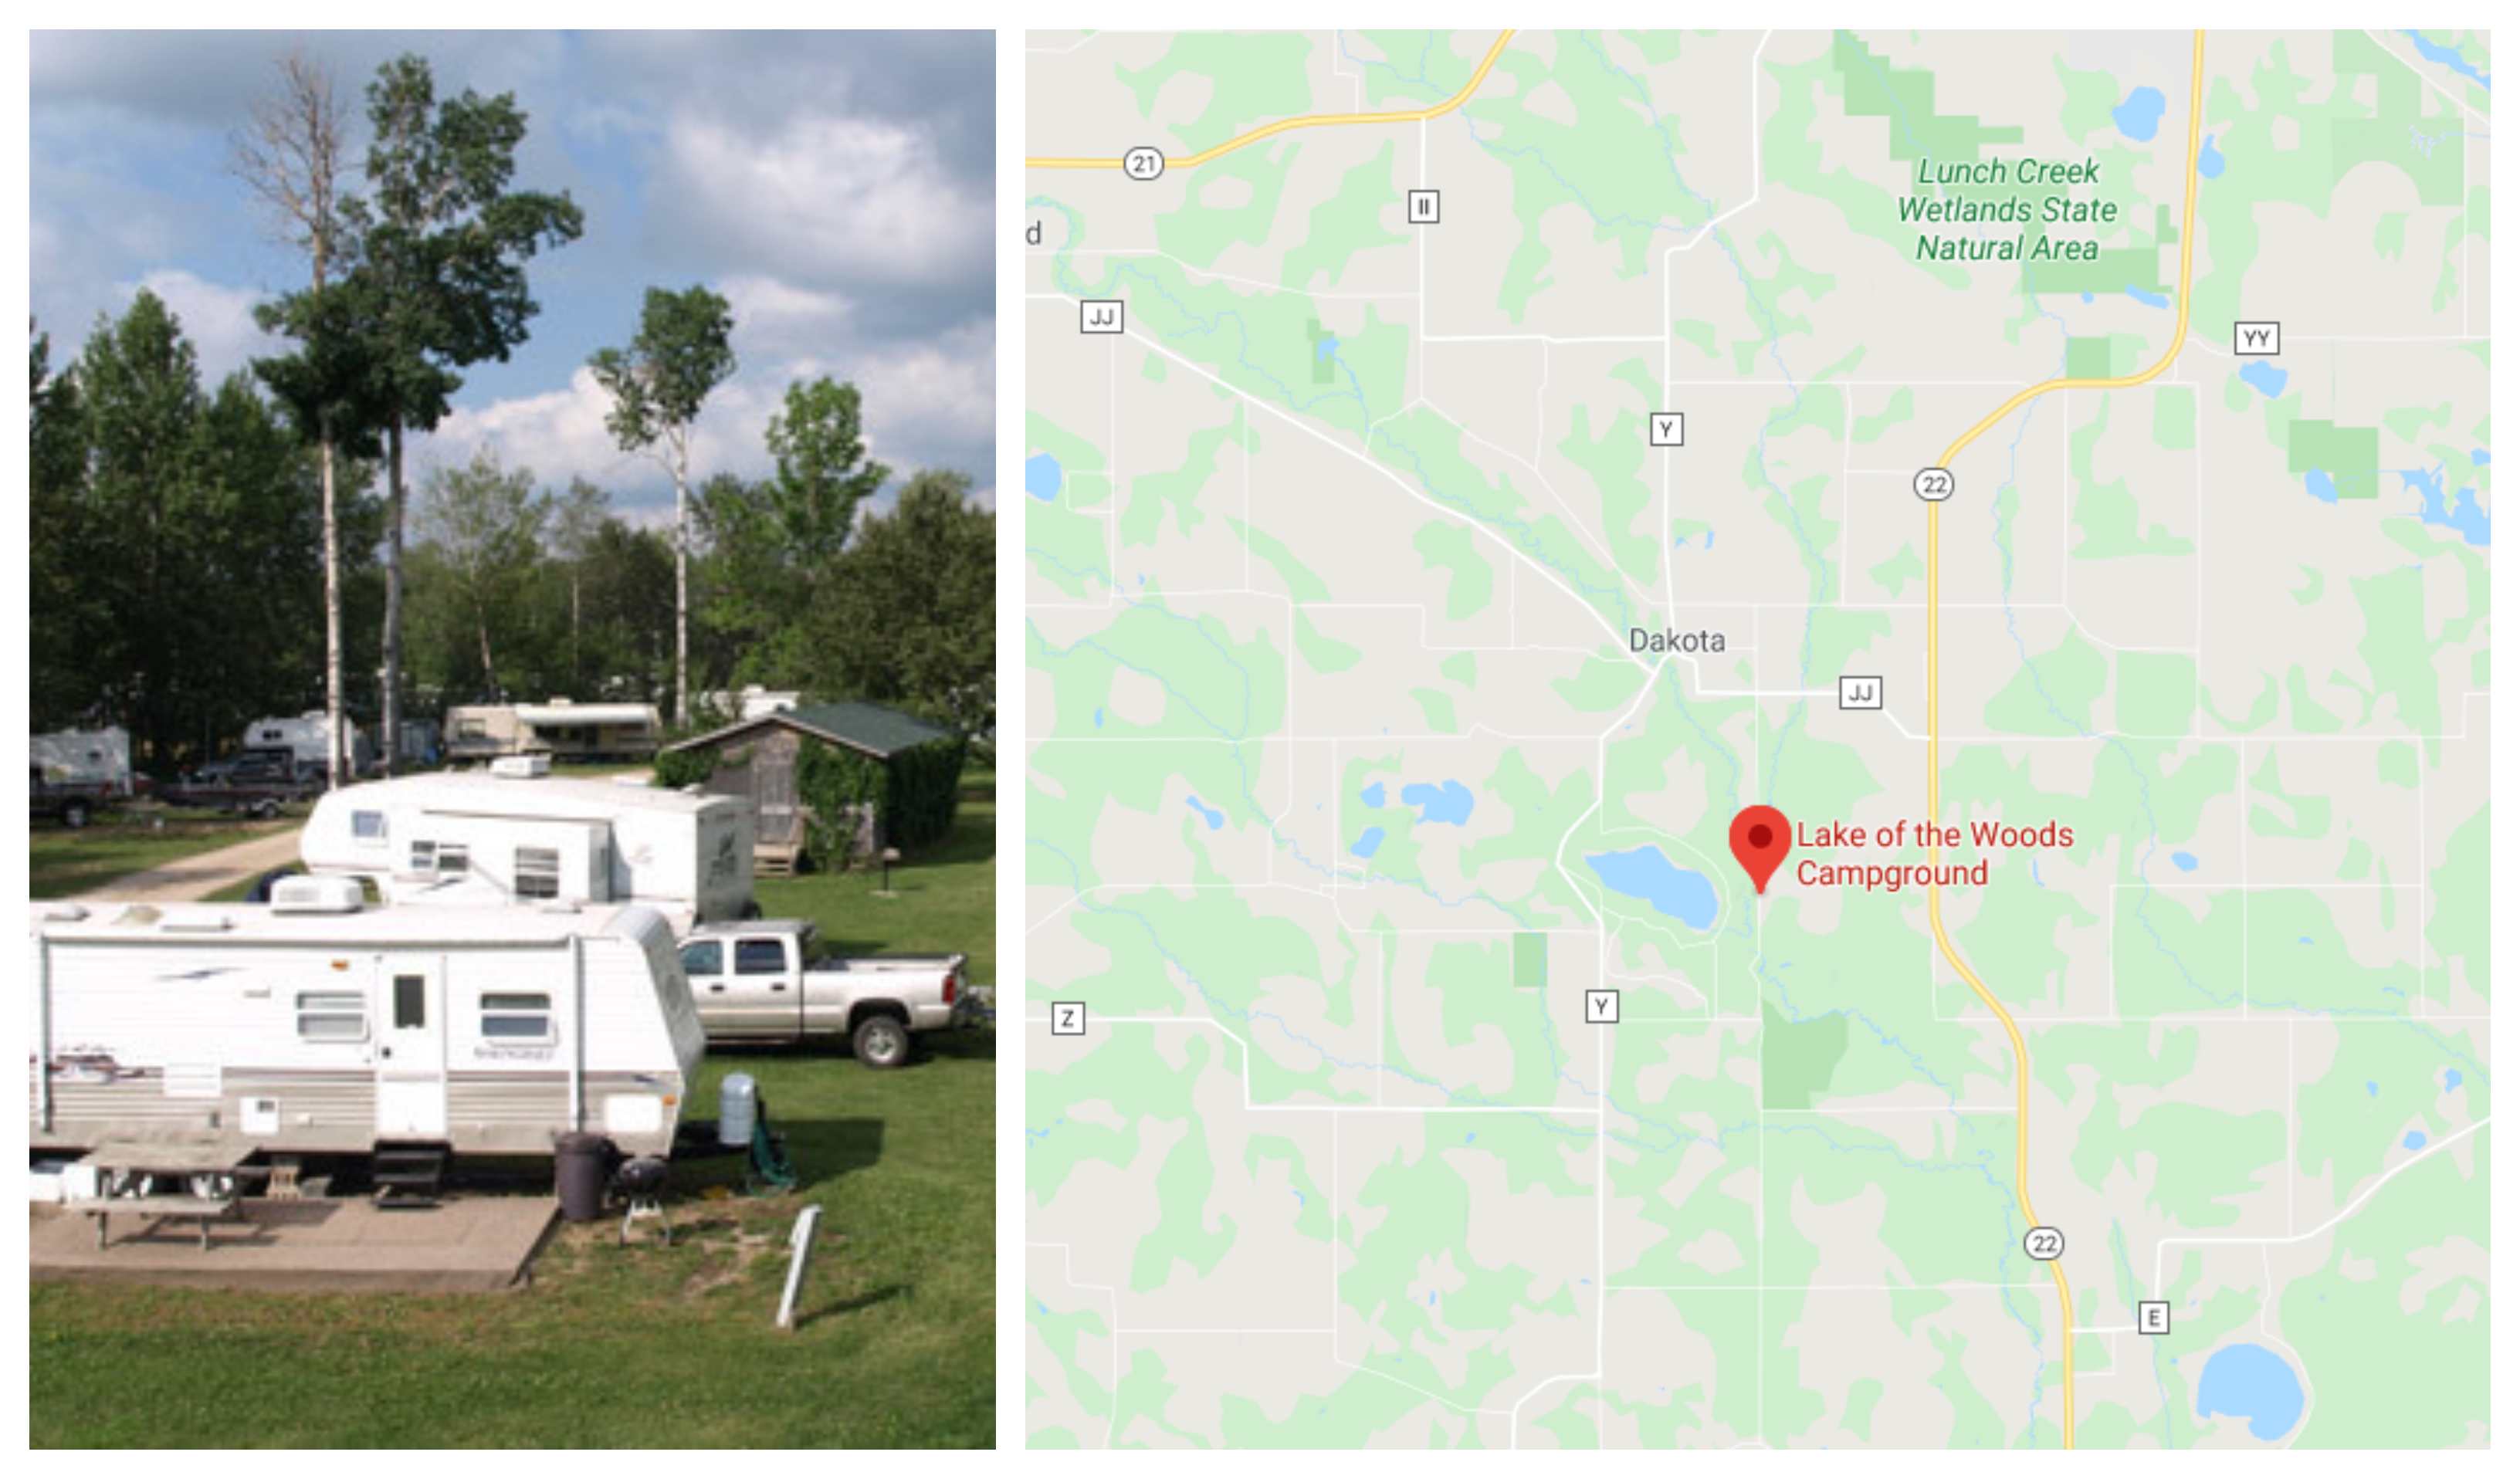 Lake Of The Woods Campground and maps